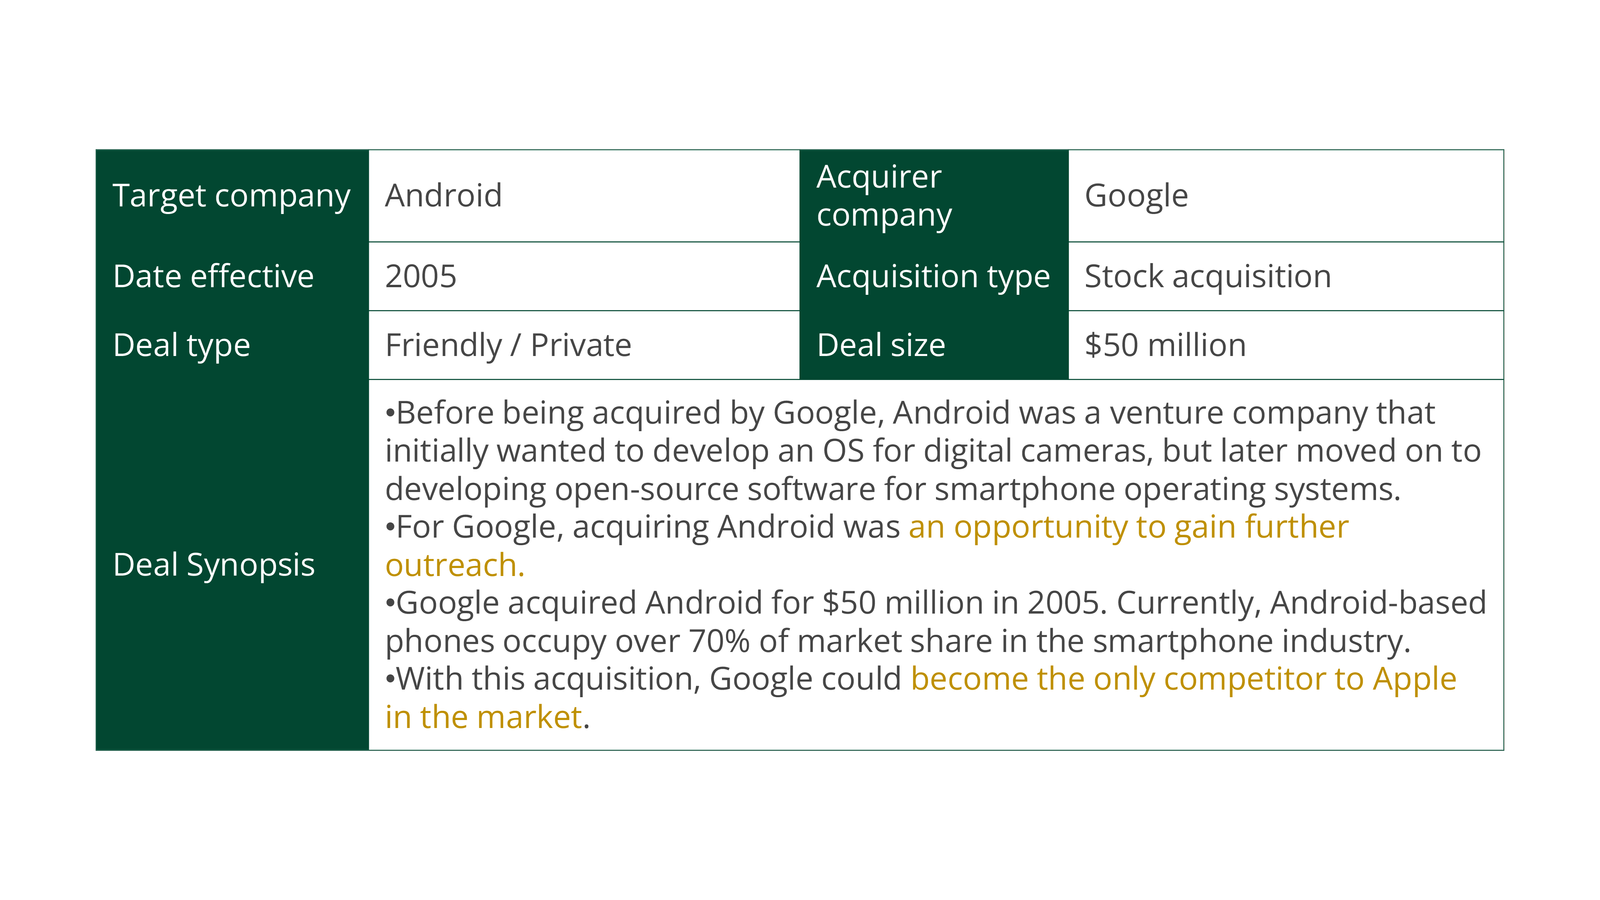 Case study of Google’s Acquisition of Android